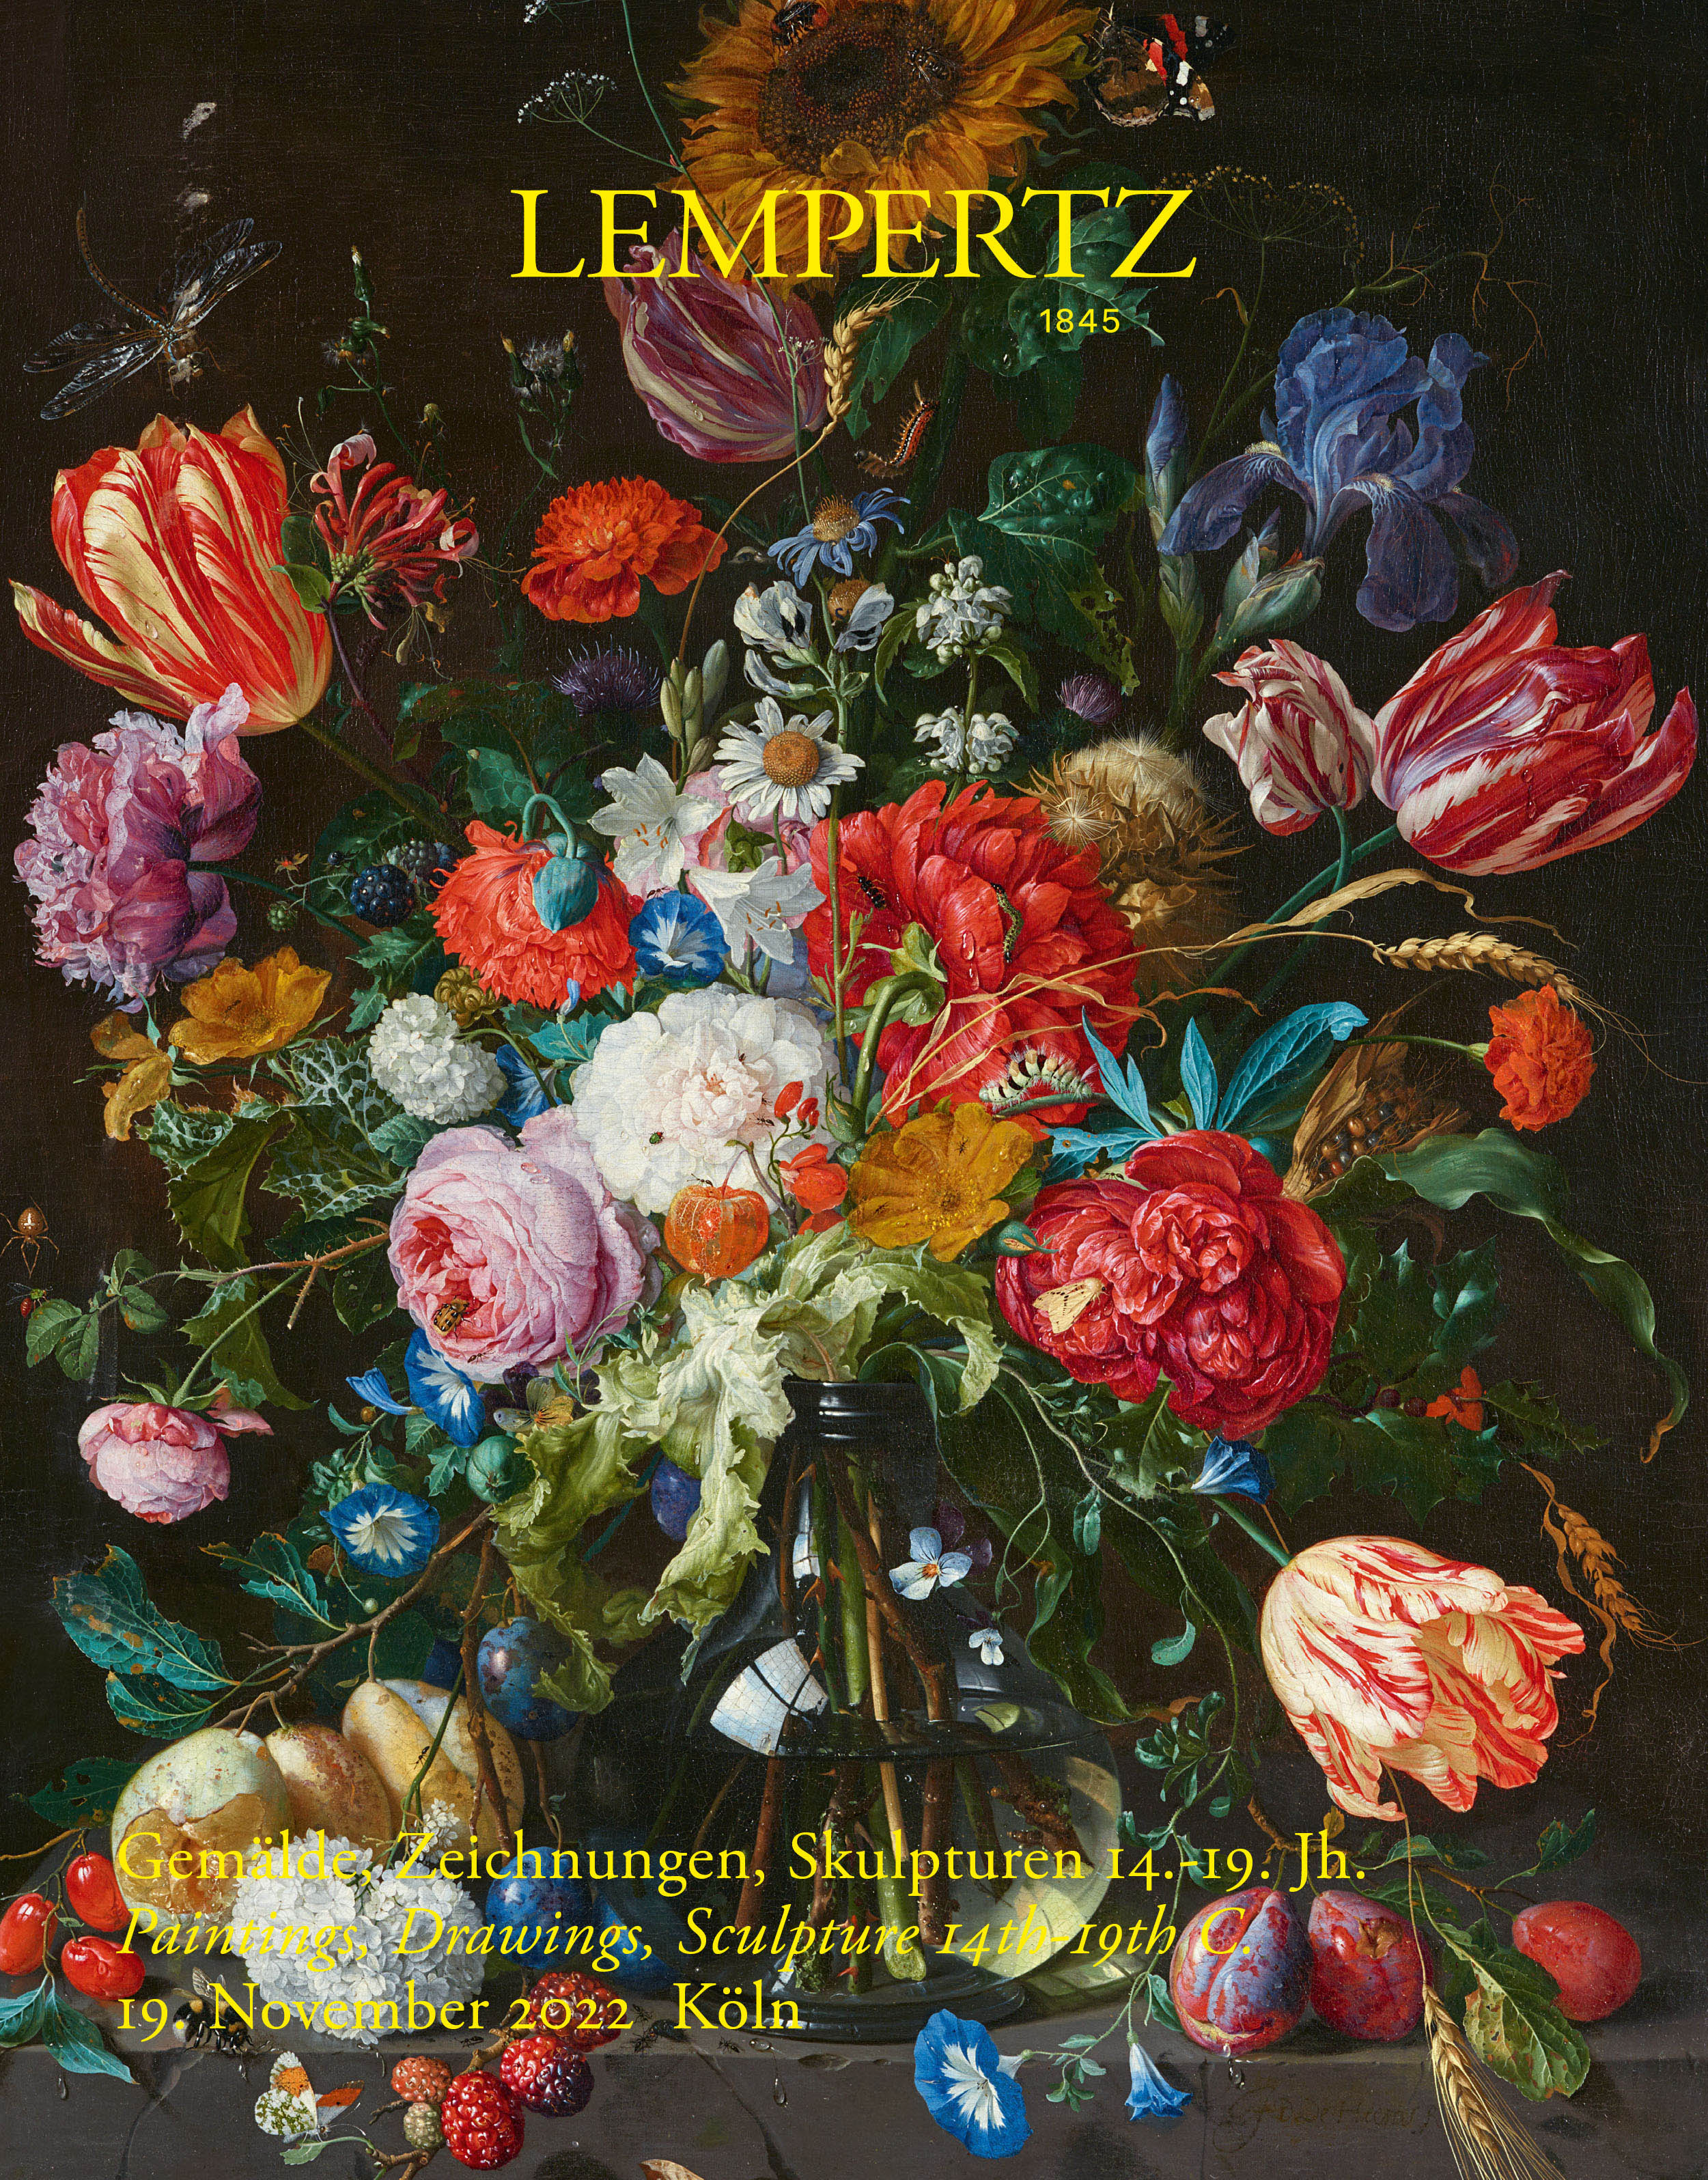 Catalogue - Paintings, Drawings, Sculpture 14th-19th Centuries - Online Catalogue - Auction 1209 – Purchase valuable works of art at the next Lempertz-Auction!